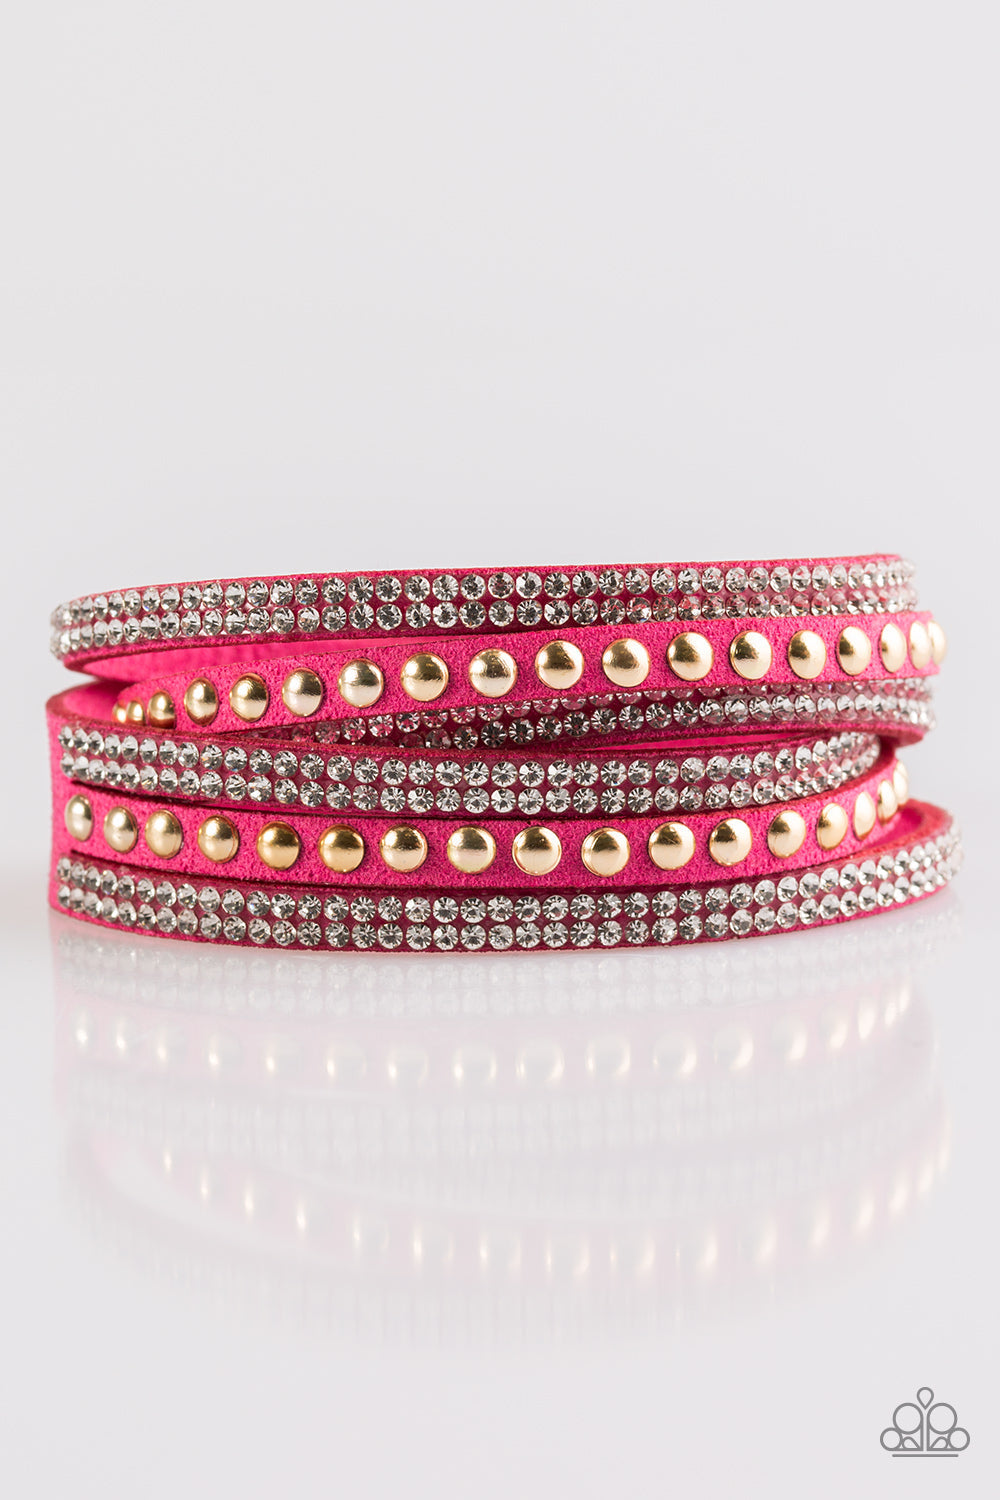 I BOLD You So! - Pink and Gold Wrap Bracelet - Paparazzi Accessories - Rows of glassy white rhinestones and glistening gold studs are pressed along three strands of pink suede for a sassy look. The elongated band allows for a trendy double wrap design. Features an adjustable snap closure. Sold as one individual bracelet.